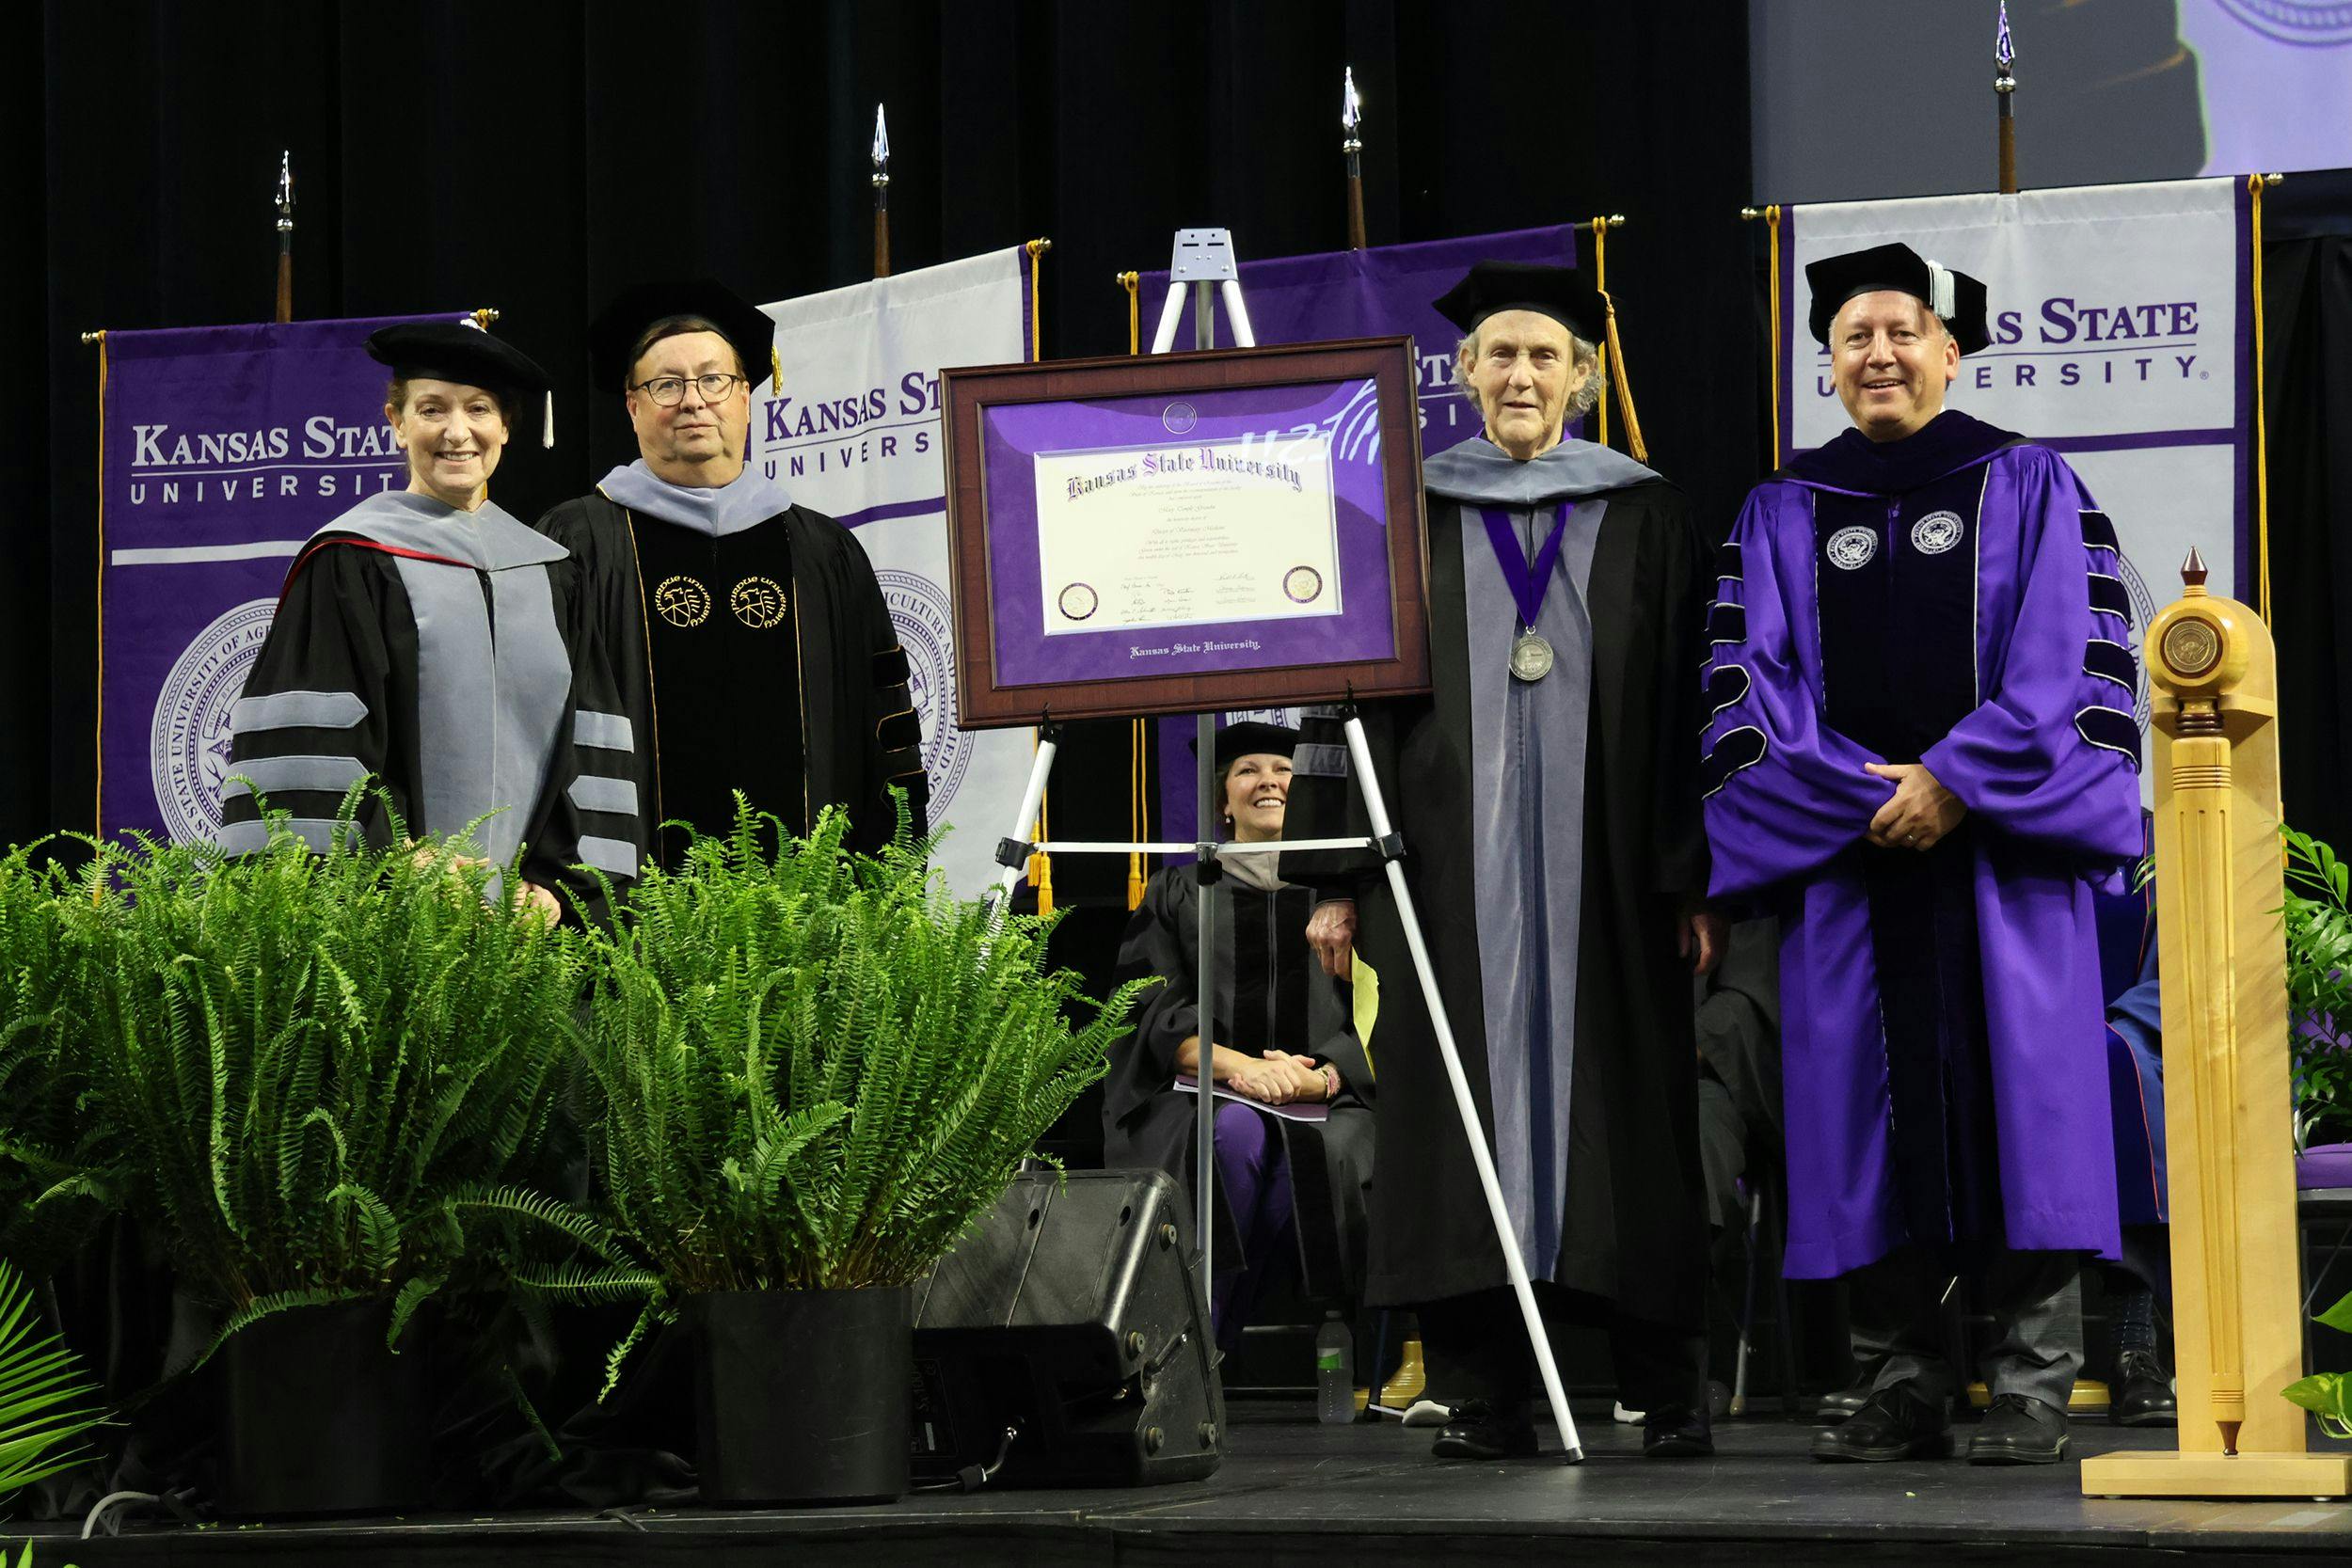 From left: Bonnie Rush, Hodes family dean; James Roush, associate dean for academic programs and student success; Grandin; and Richard Linton, K-State president (Image courtesy of Kansas State University College of Veterinary Medicine) 